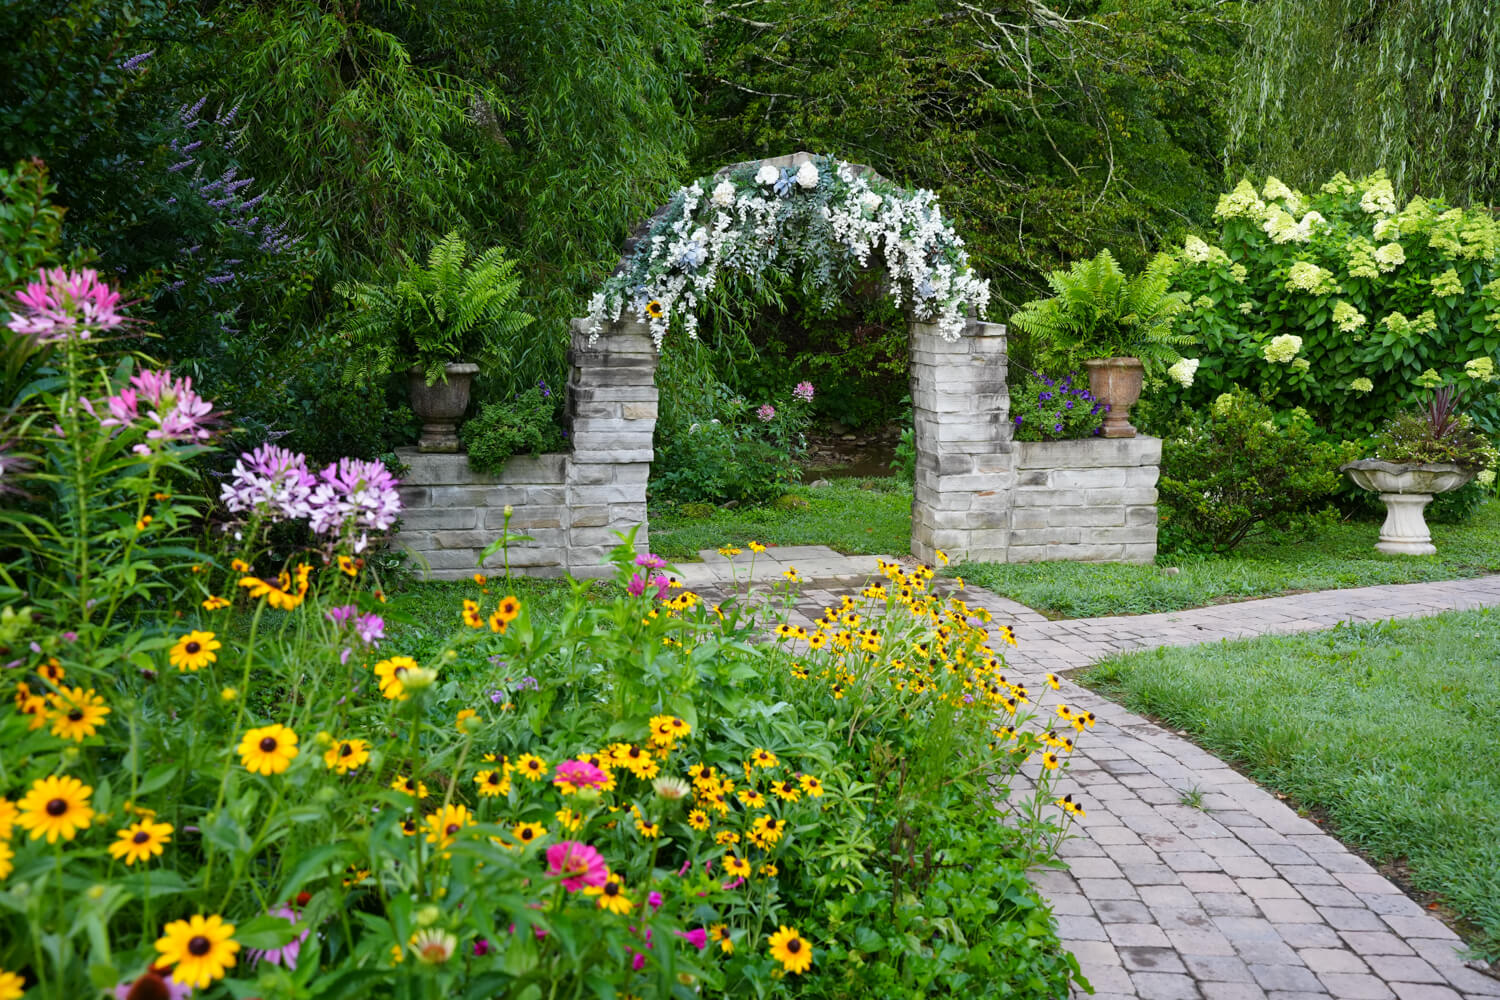 Stone arch wedding ceremony site in the wildflower garden with yellow rudbekia and pink cleome at Honeysuckle Hills in Pigeon Forge